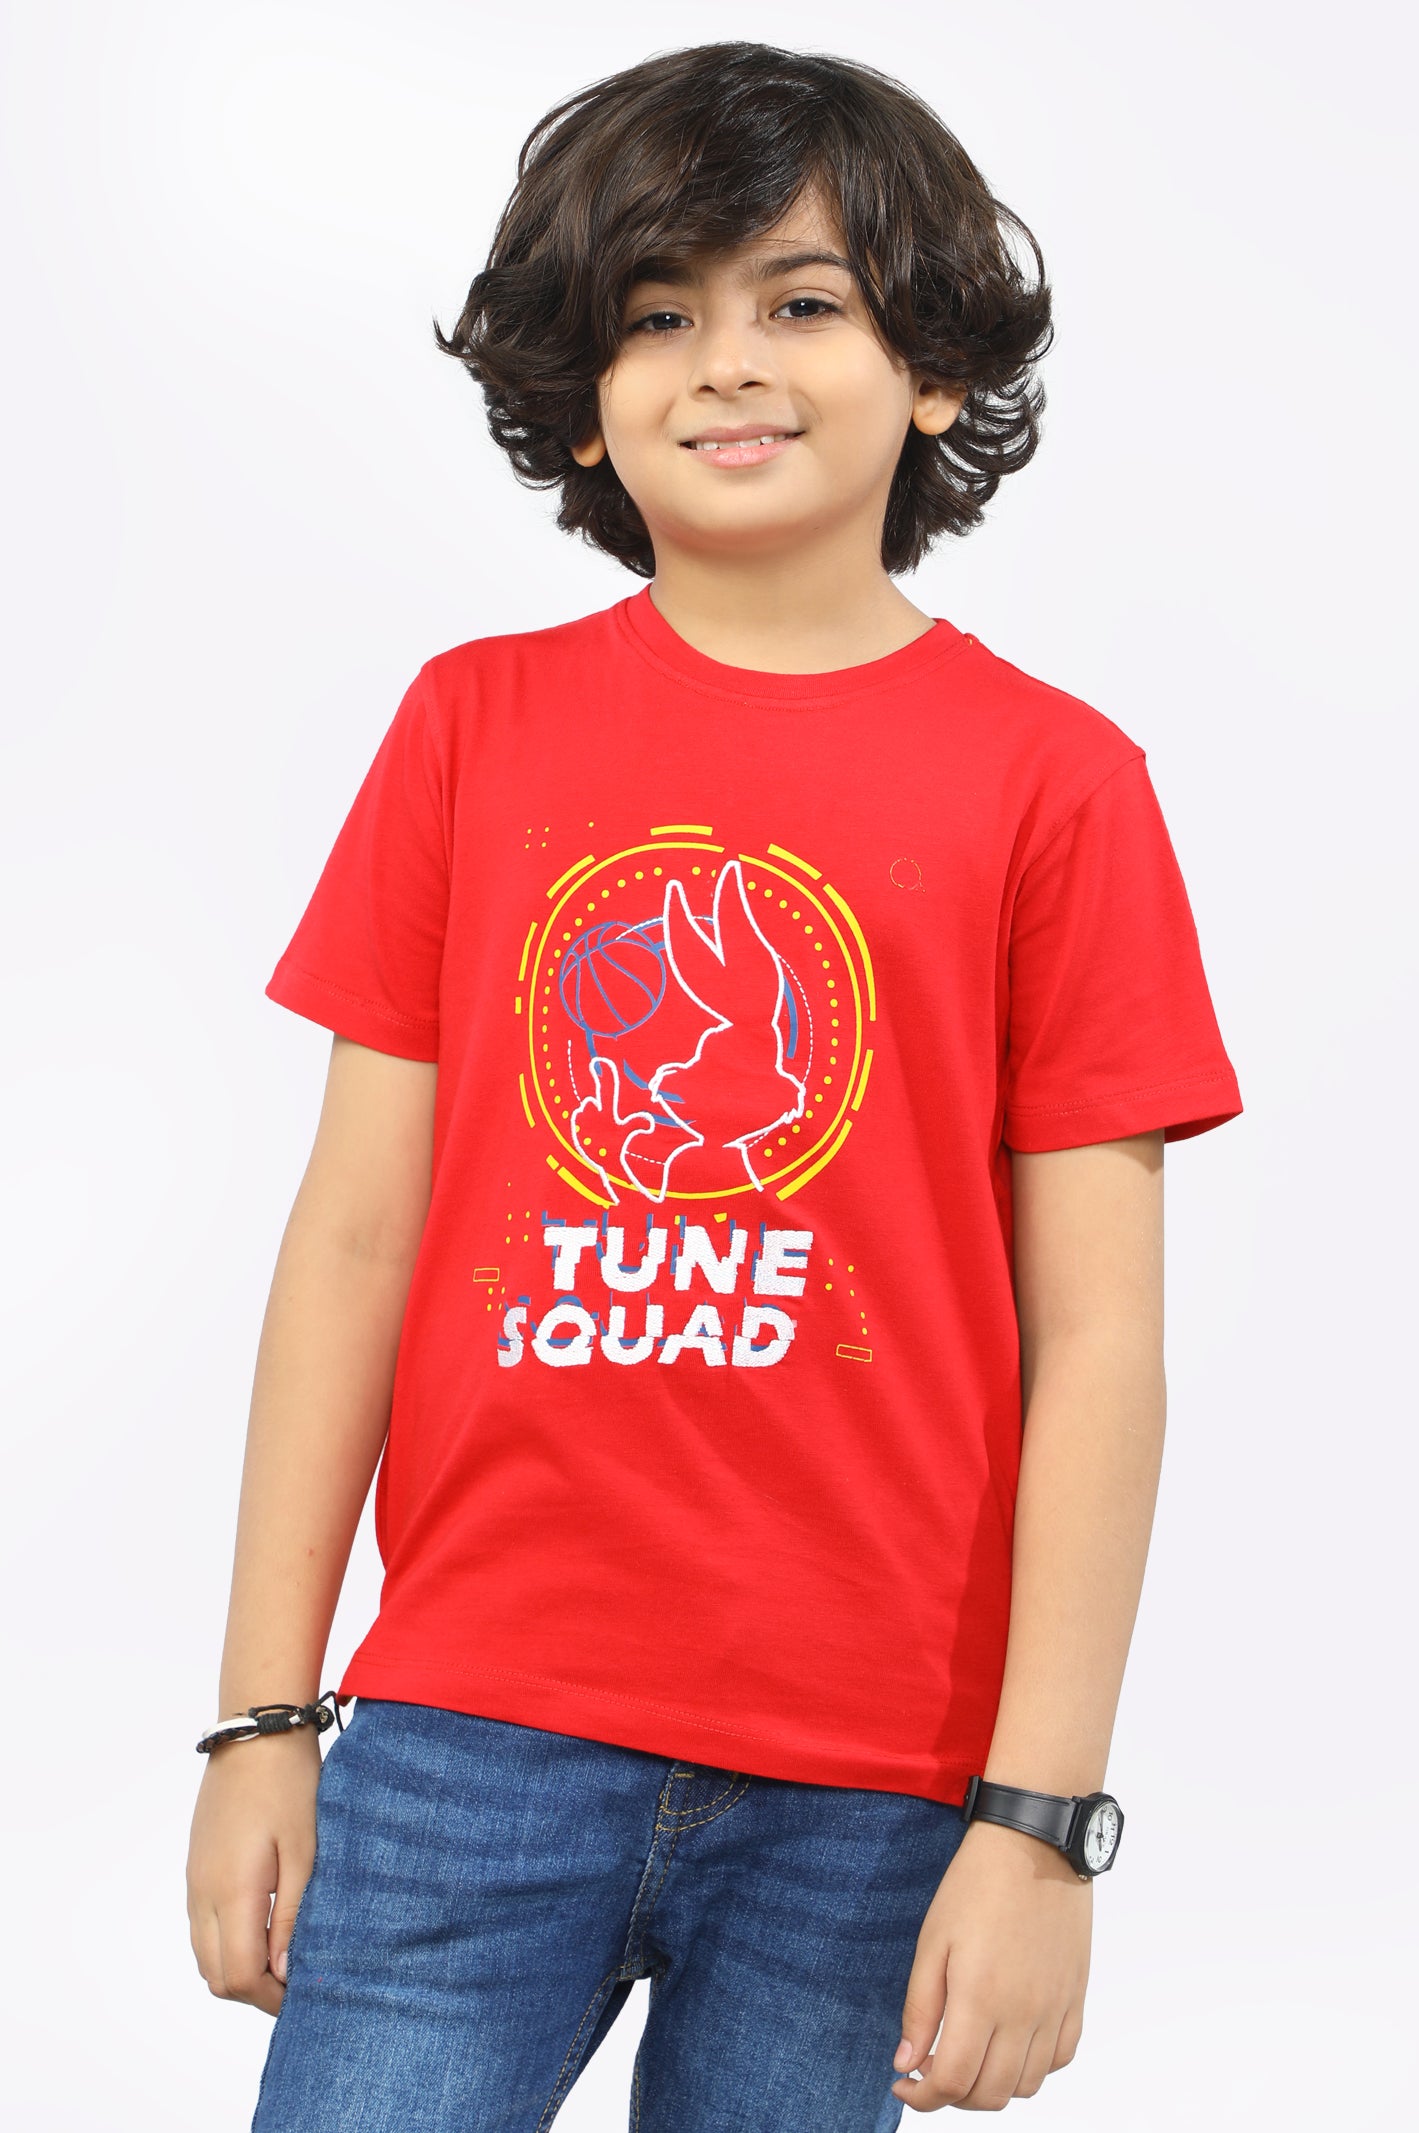 Tunes Squad Print Tees From Diners